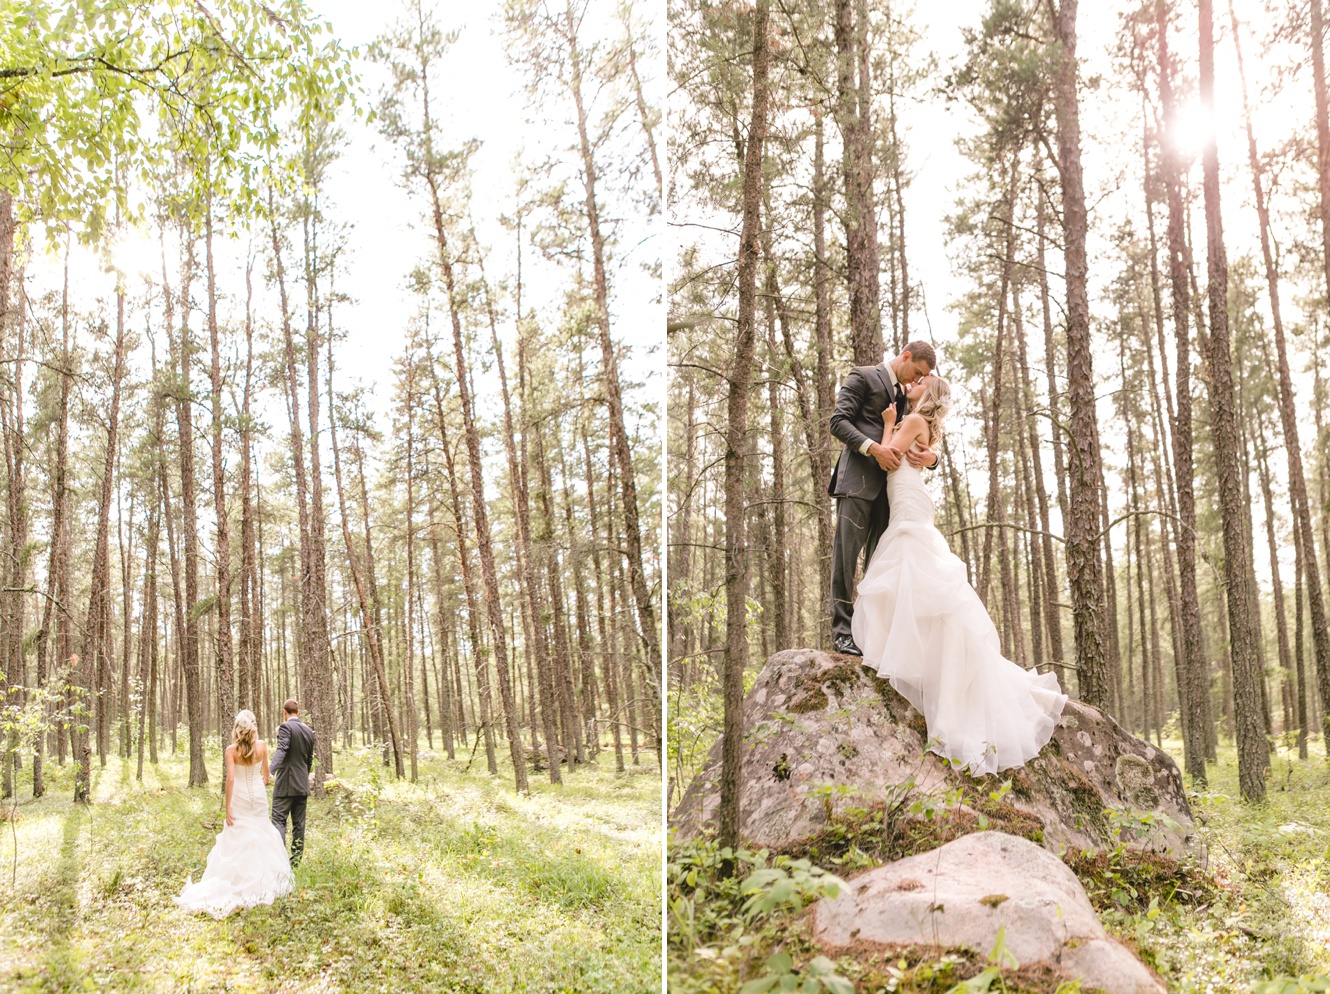 Pineridge Hollow Manitoba Storybook Fairytale Wedding Kristen Booth Vintage Forest Enchanged Woodsy Bridal Portraits Photography Photographer 0071 Regina Wedding Photographers Mountain Weddings